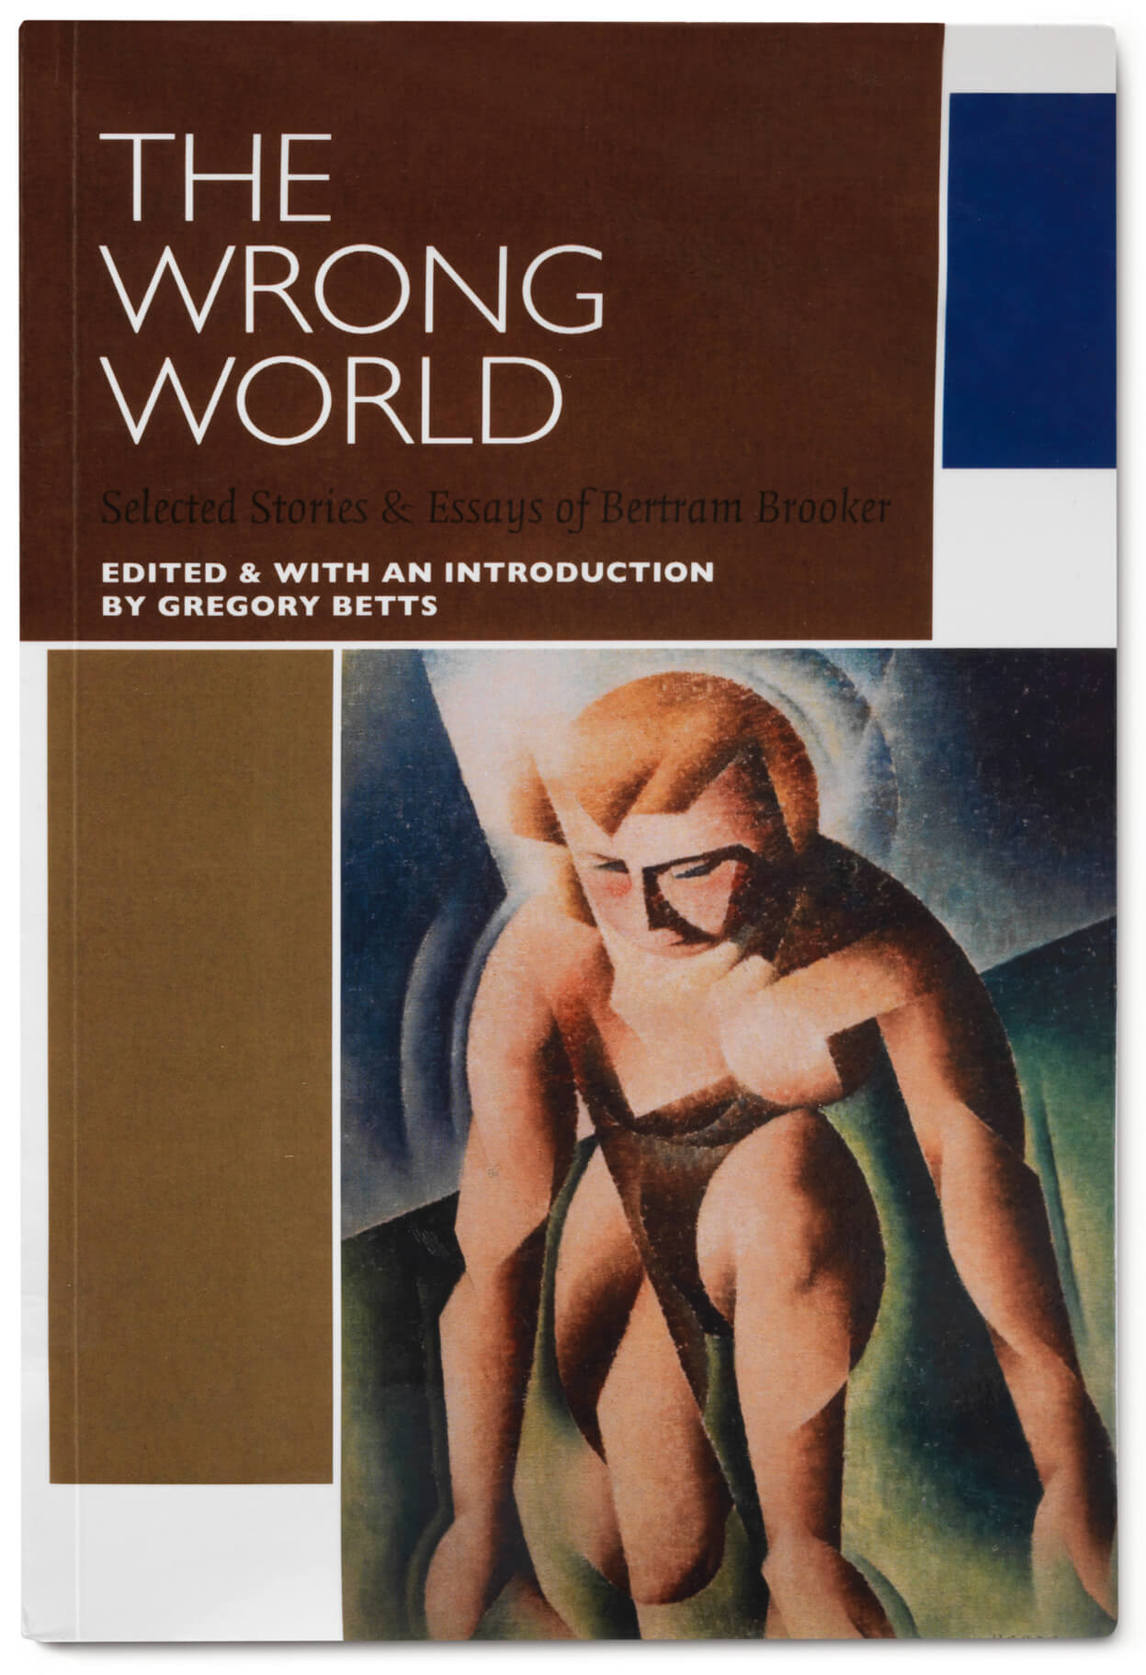  Couverture de The Wrong World: Selected Stories and Essays by Bertram Brooker, Gregory Betts, éd.